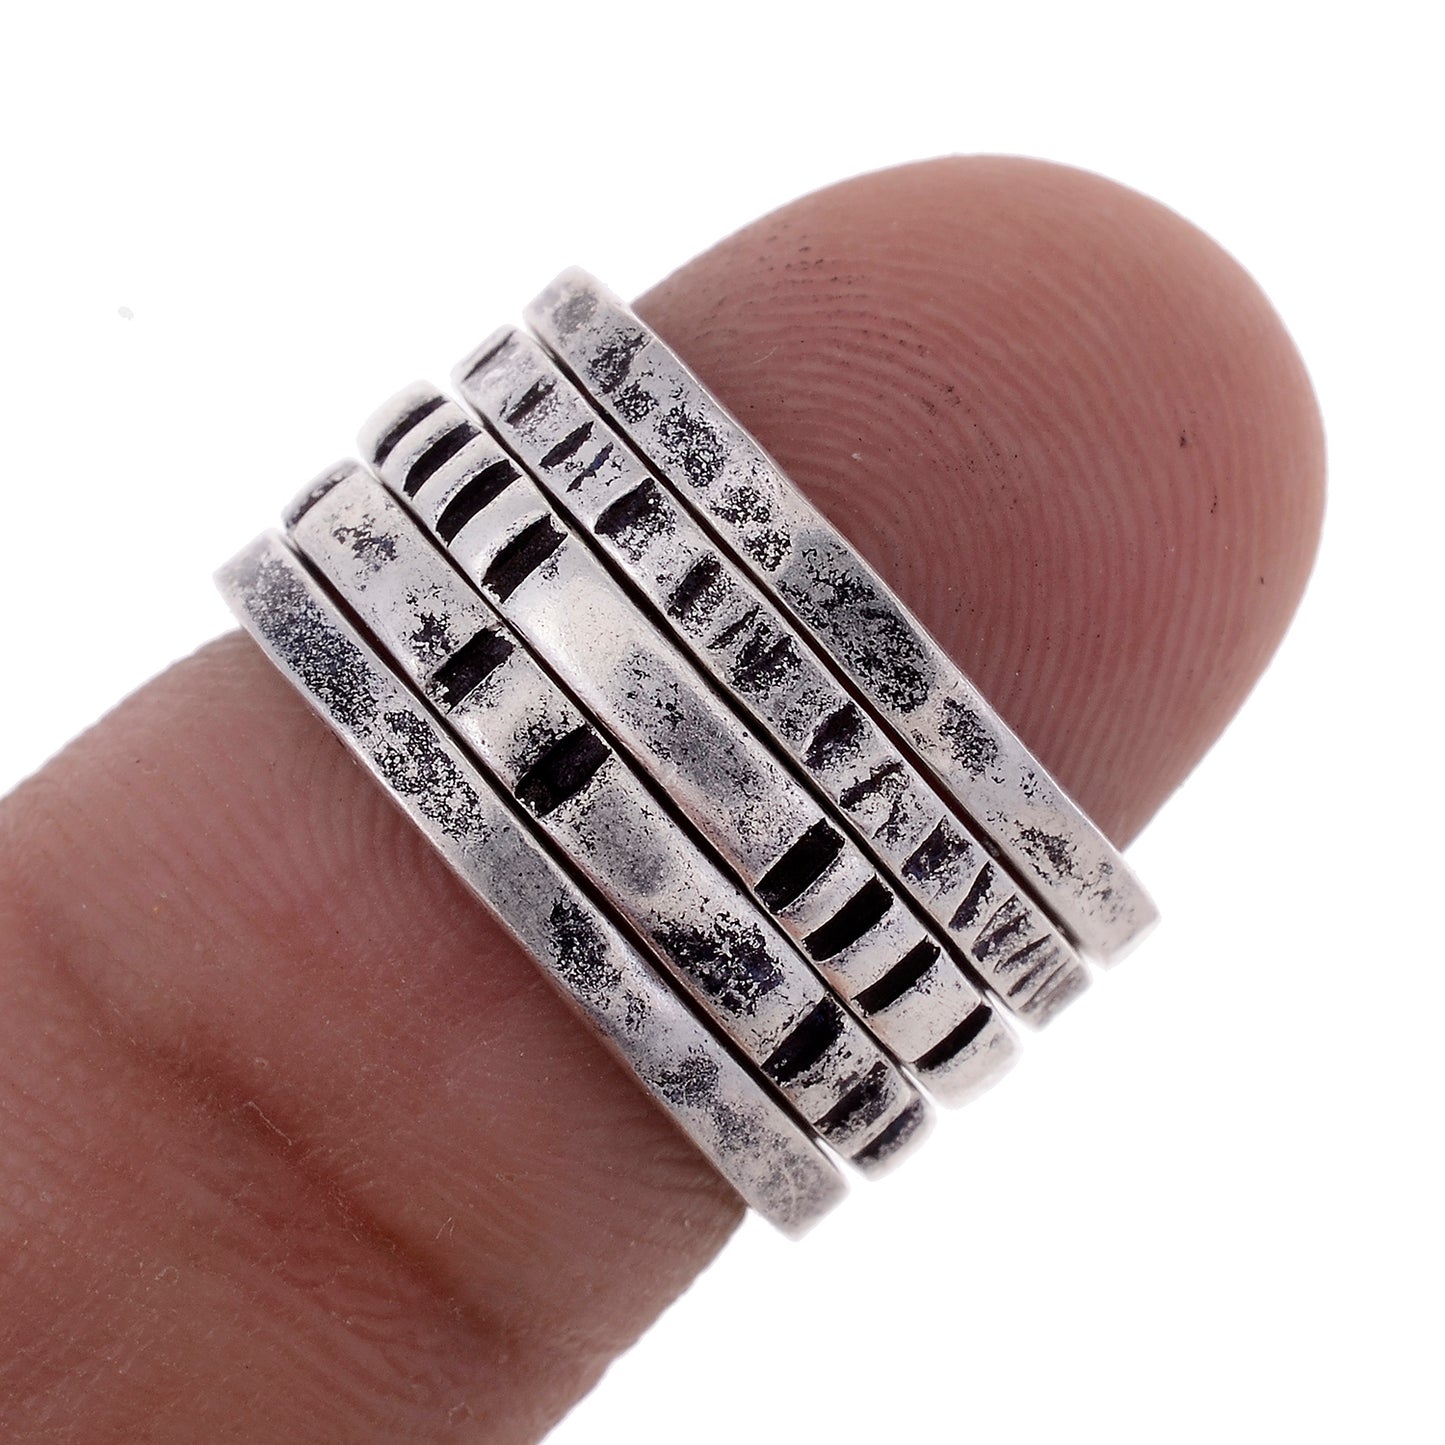 Sterling Silver Hand Hammered Stack Rings -Sizes 5-10